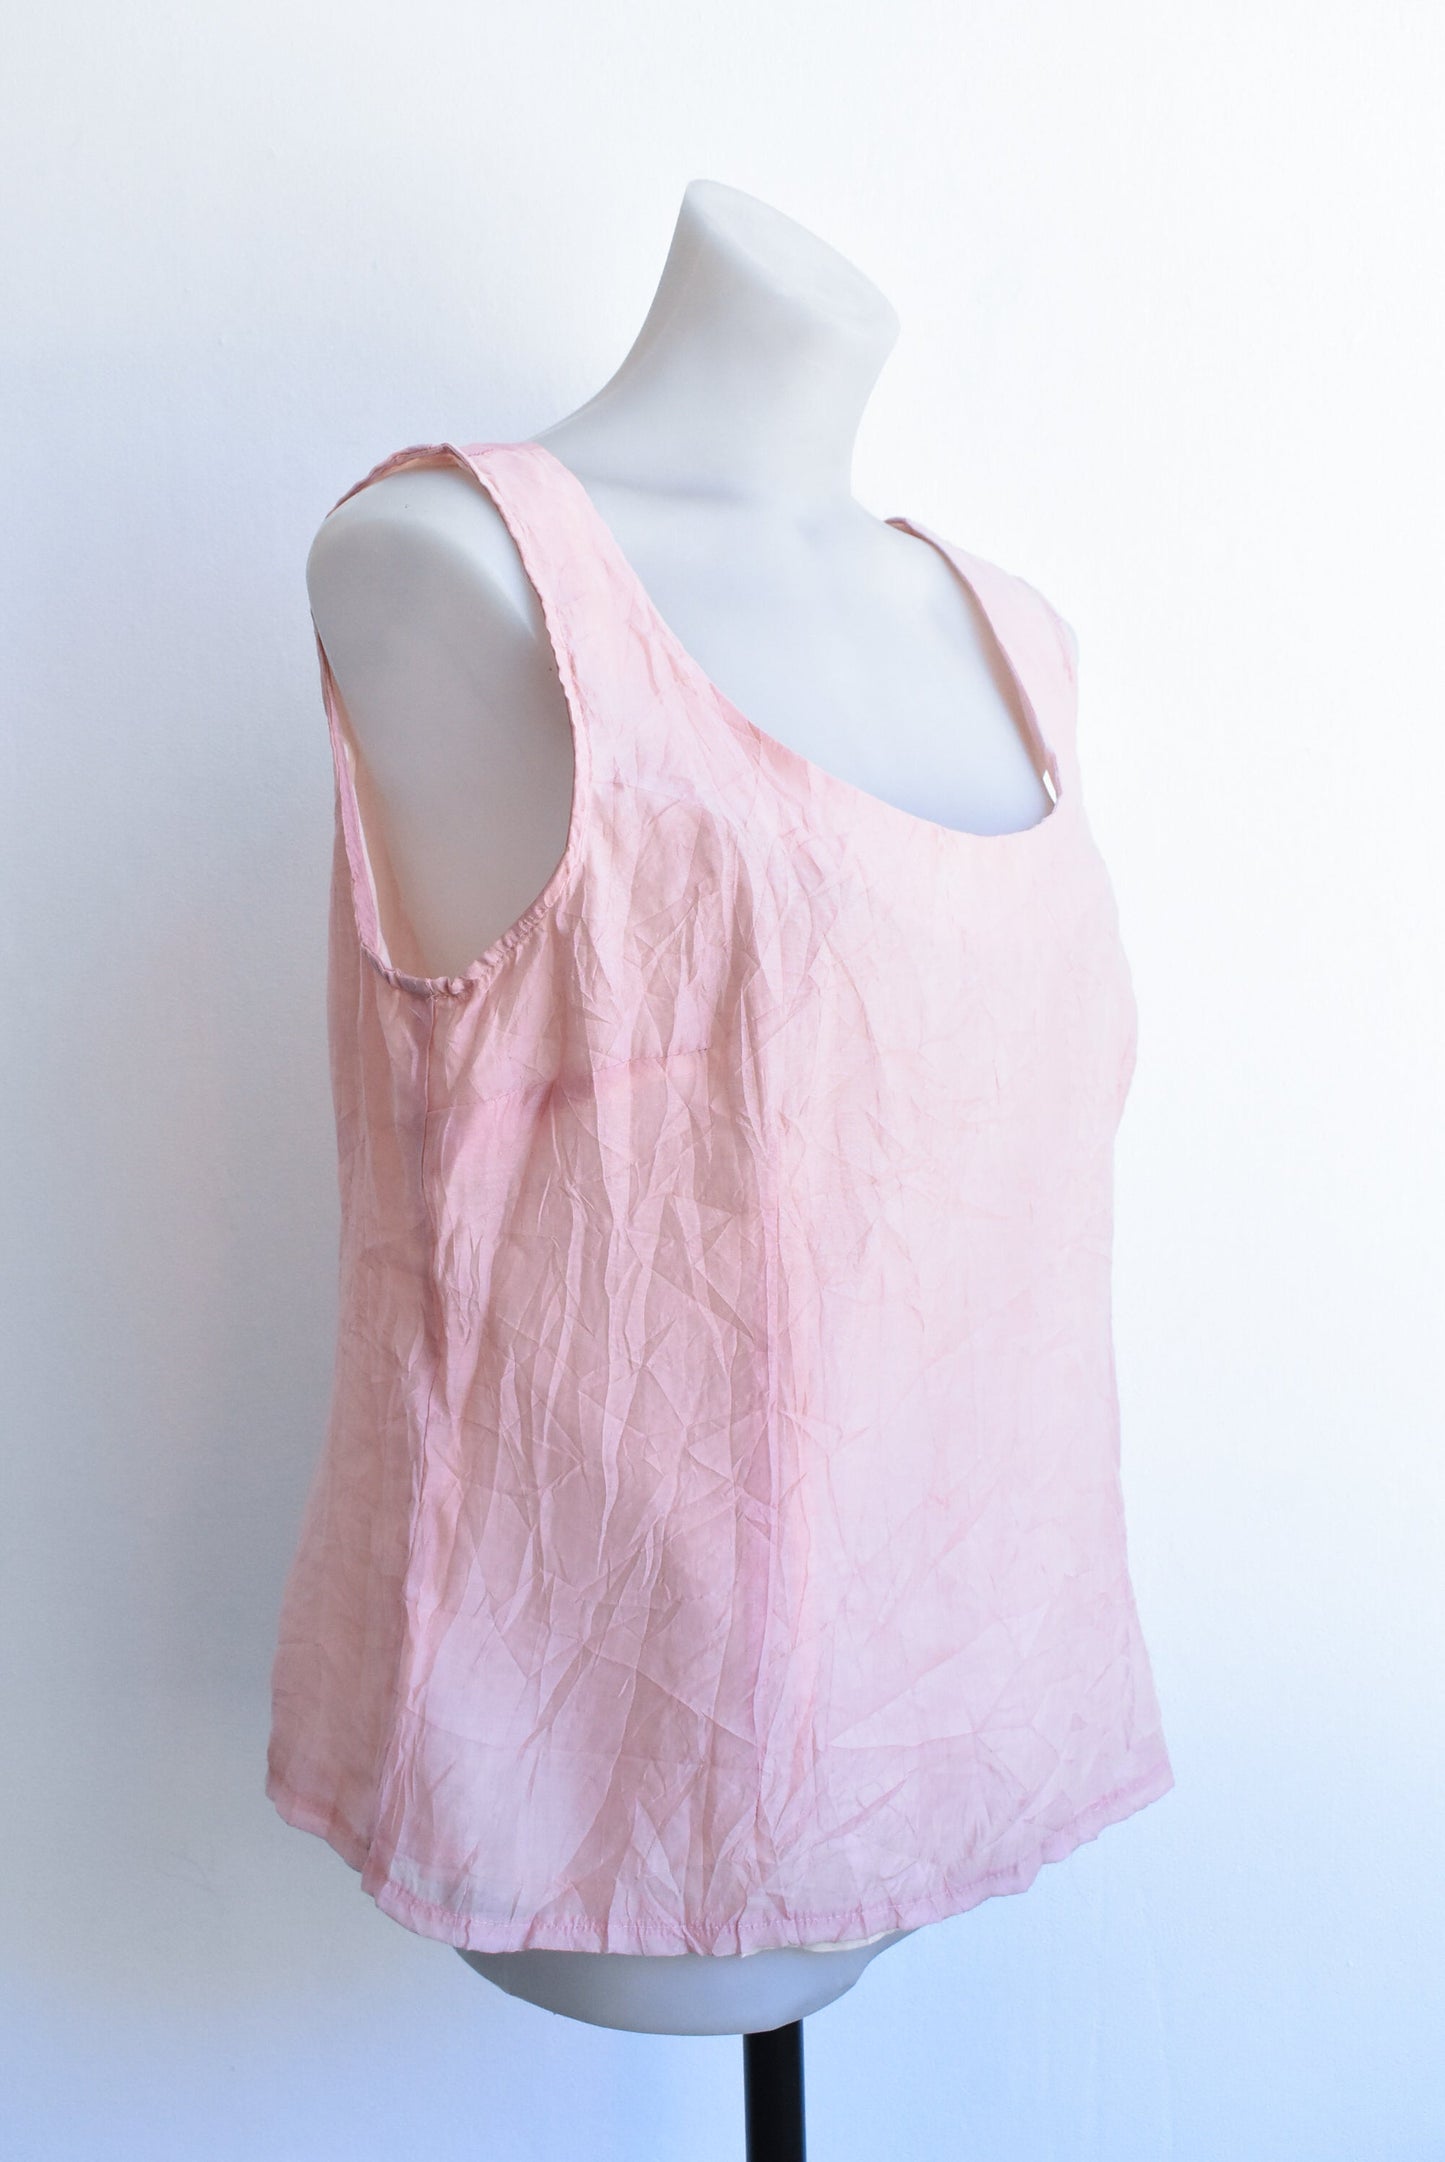 Lisa Law crinkly pink sleeveless top NEW, size M